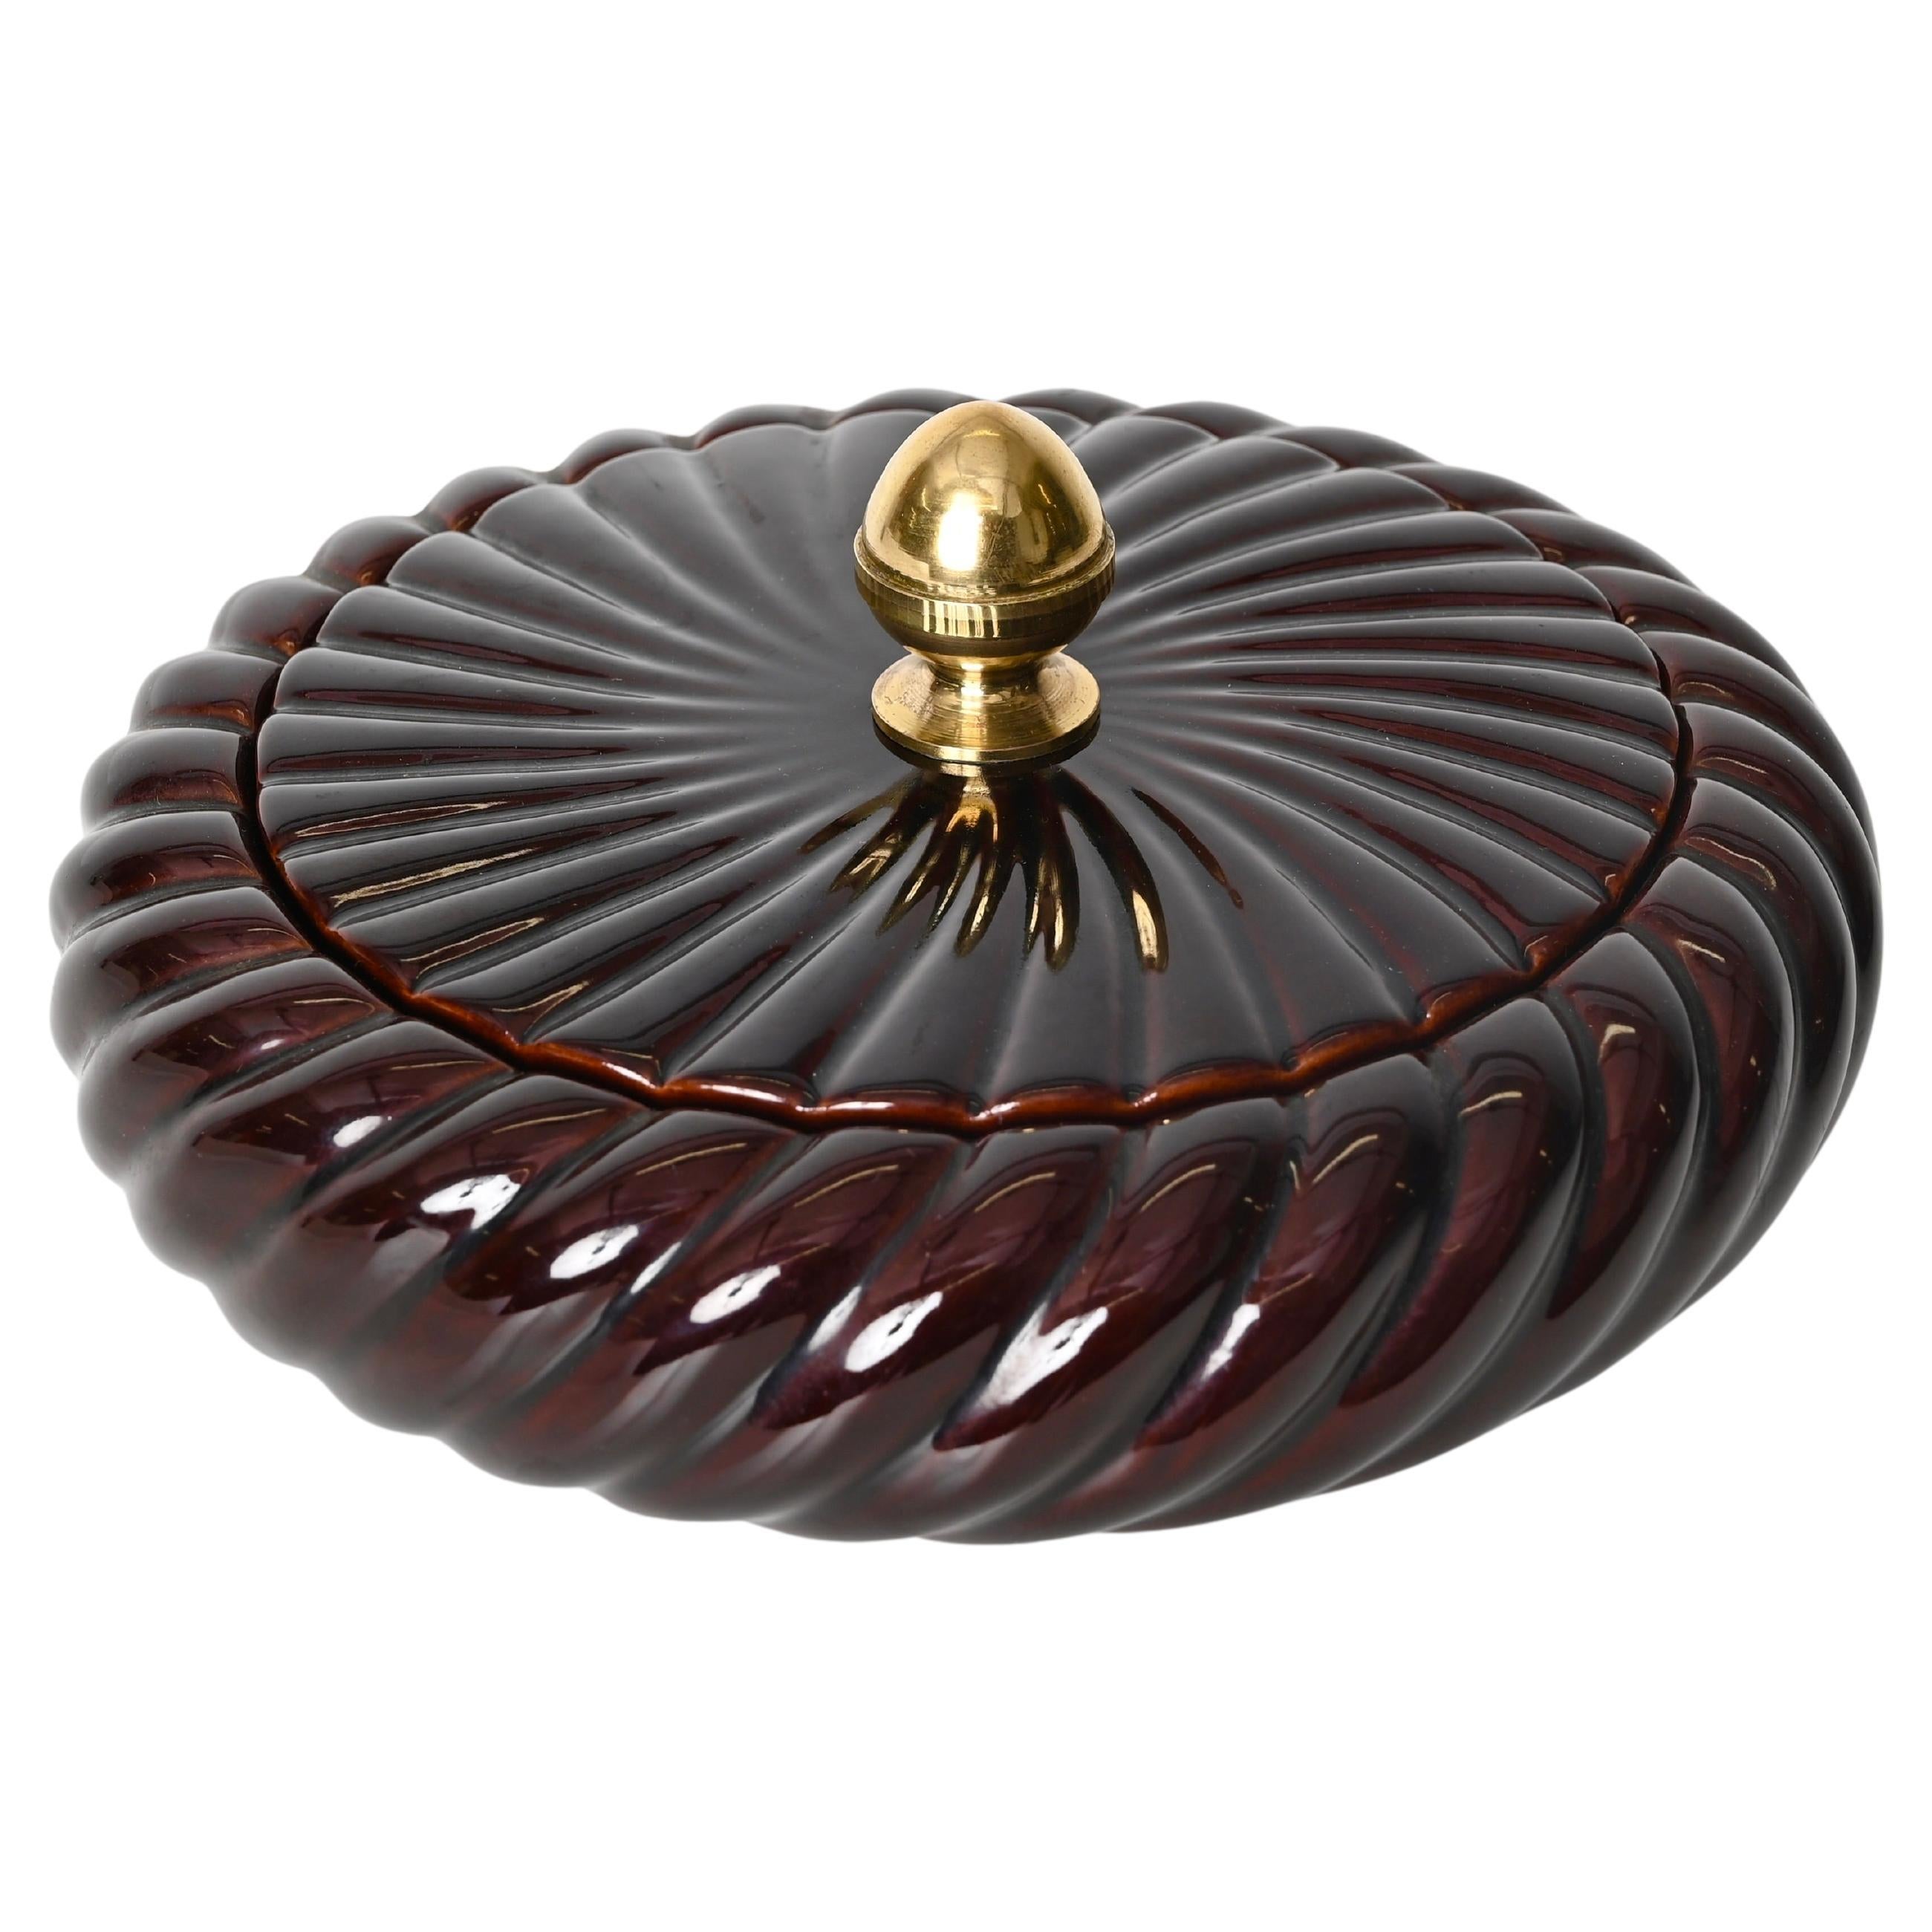 Tommaso Barbi Brown Ceramic and Brass Decorative Box or Centerpiece, Italy 1970s For Sale